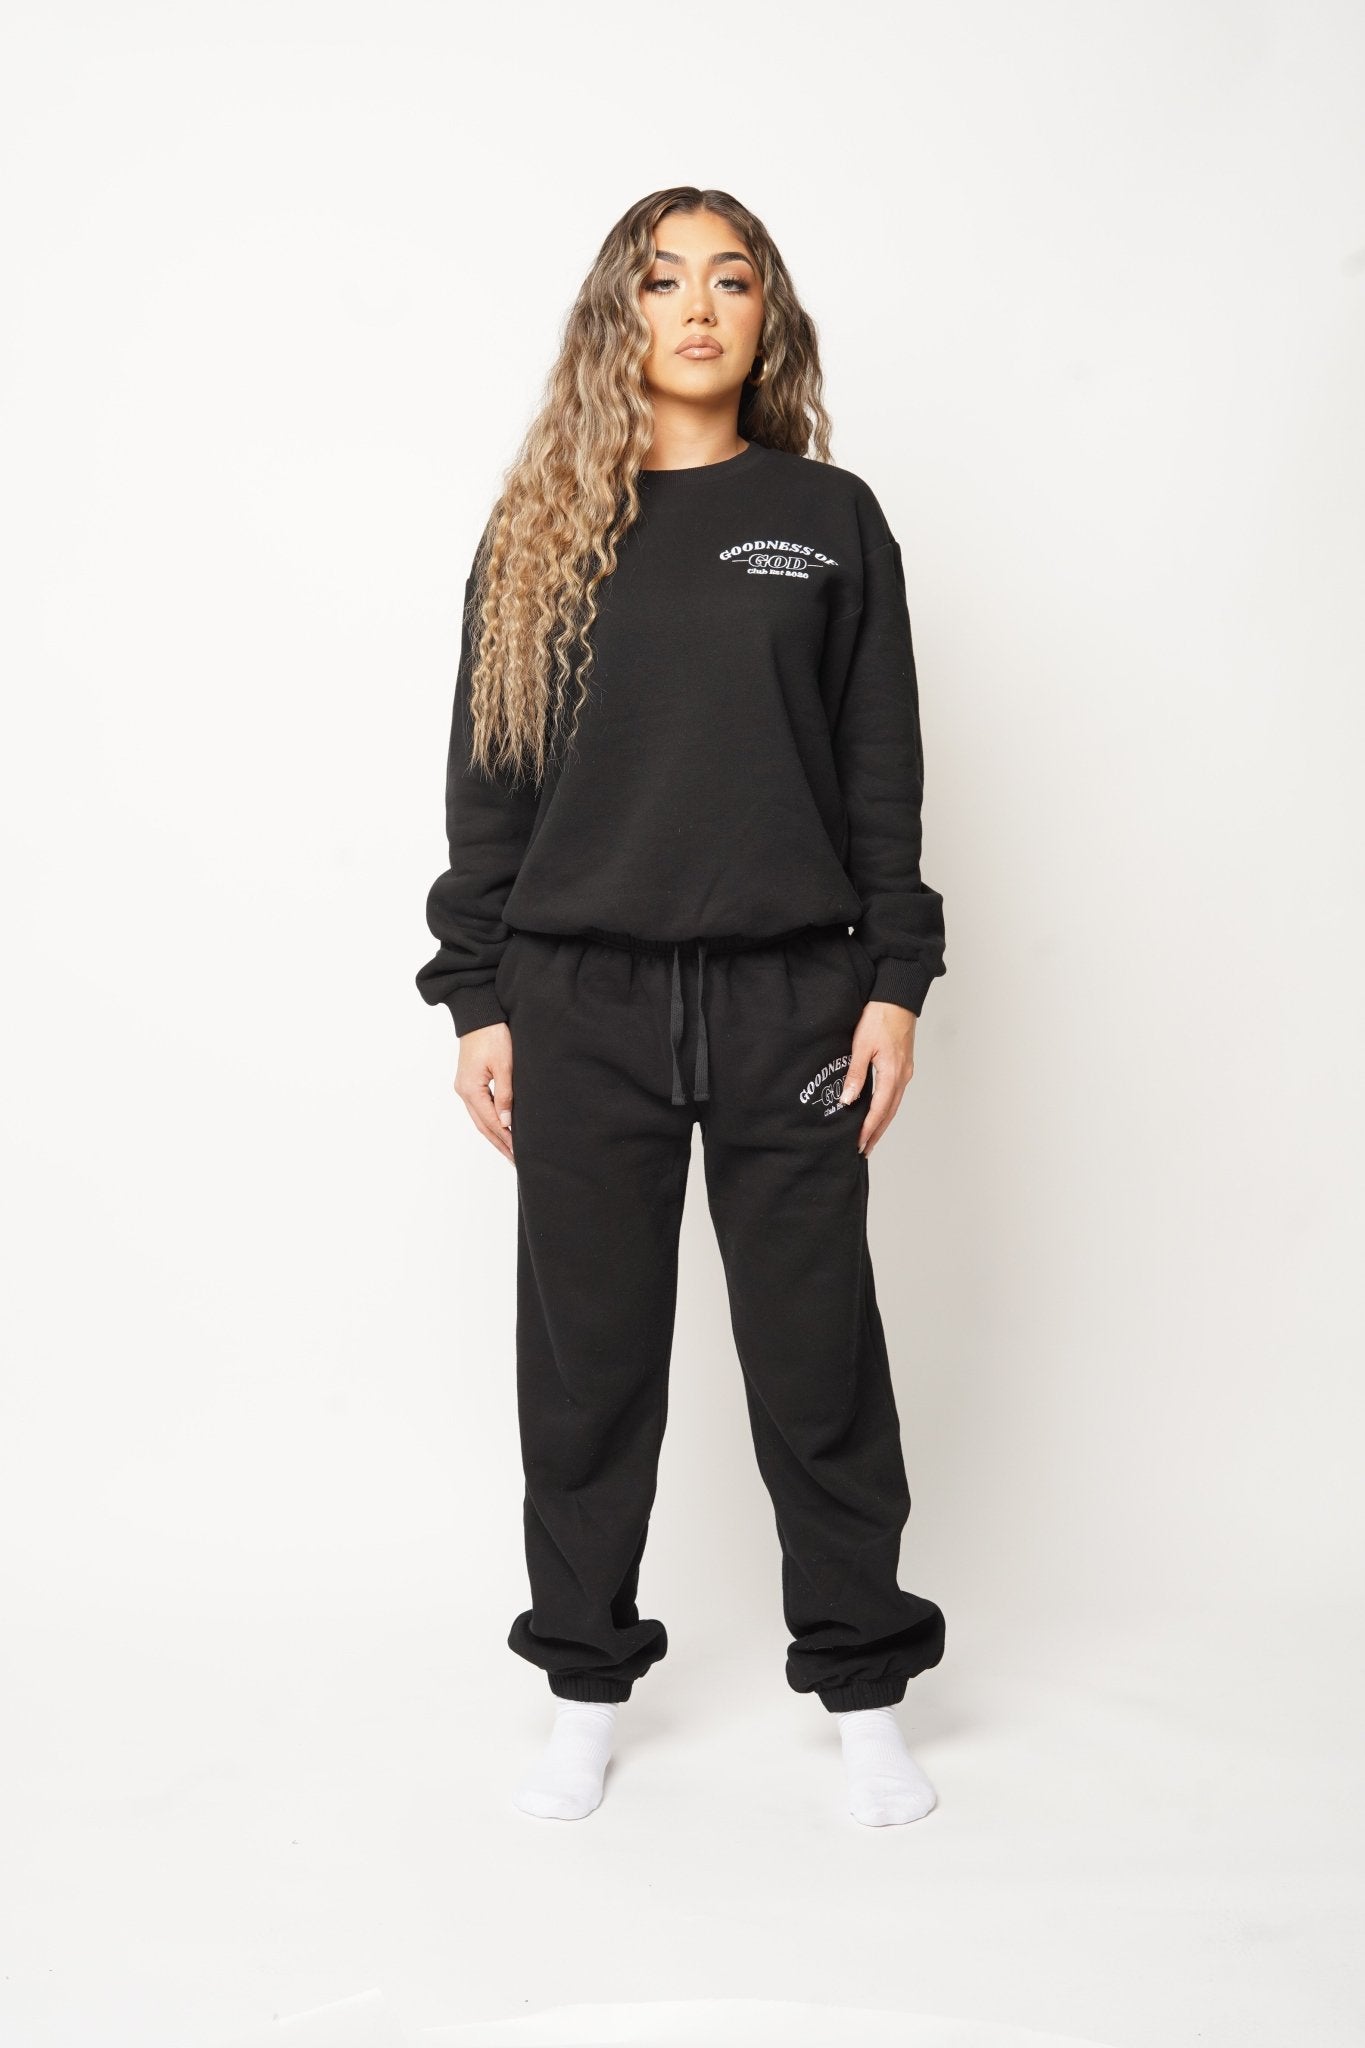 Black Sweatpants with Goodness of God embroidery logo. The perfect Christian clothing for you.